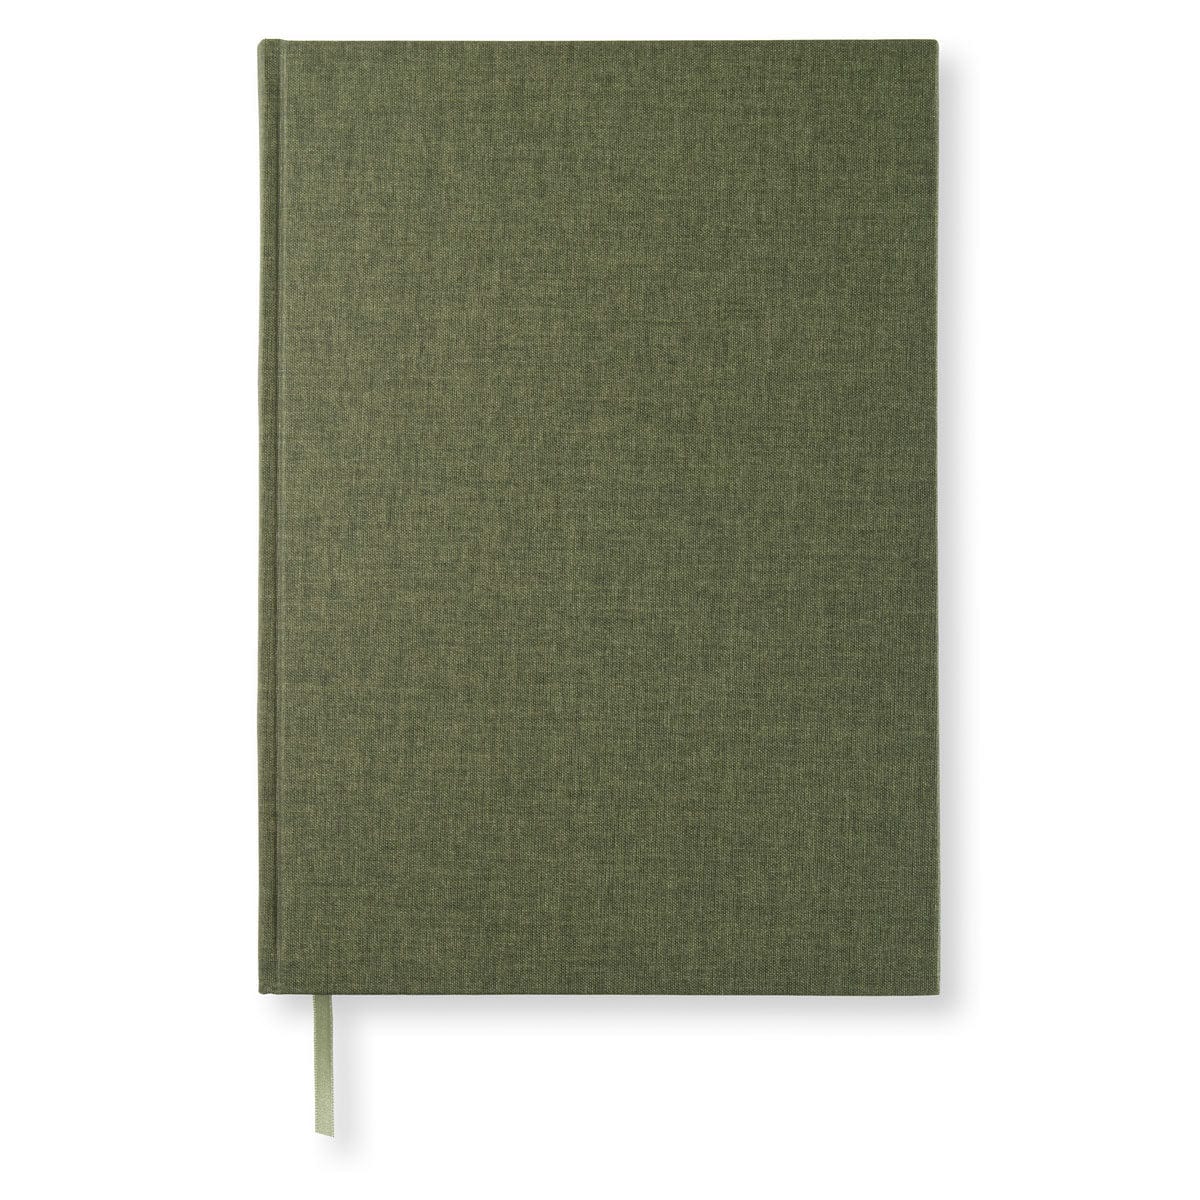 PaperStyle Paperstyle NOTEBOOK A4 Plain Khaki Green